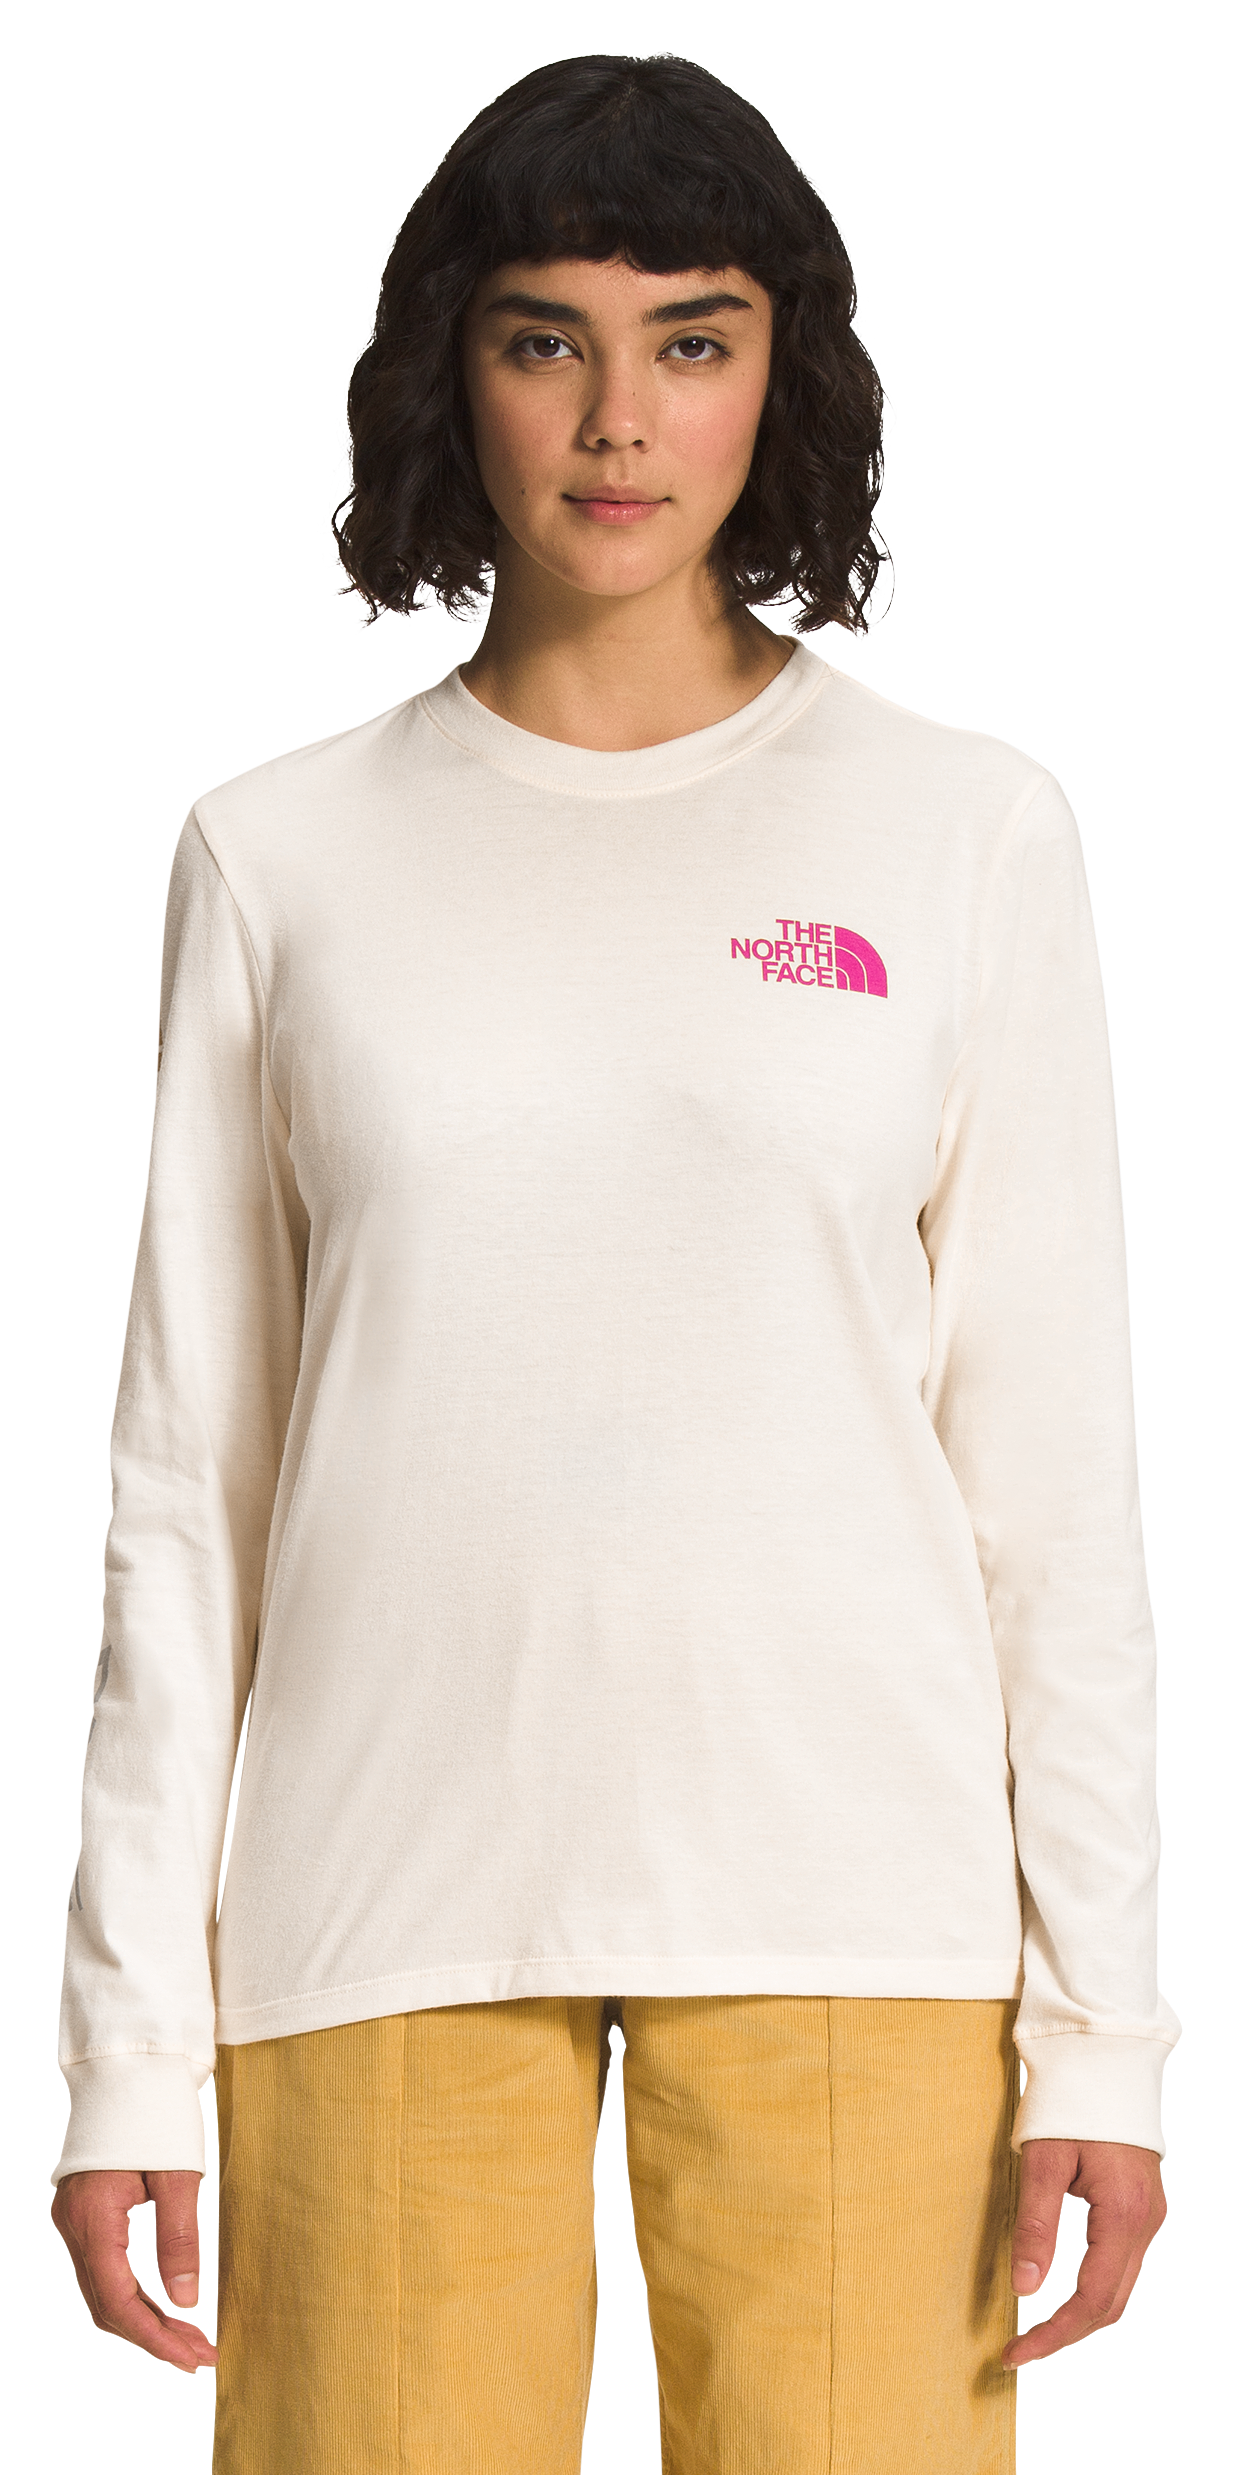 The North Face Brand Proud Long-Sleeve Shirt for Ladies - Gardenia White/Ombre Graphic - XL